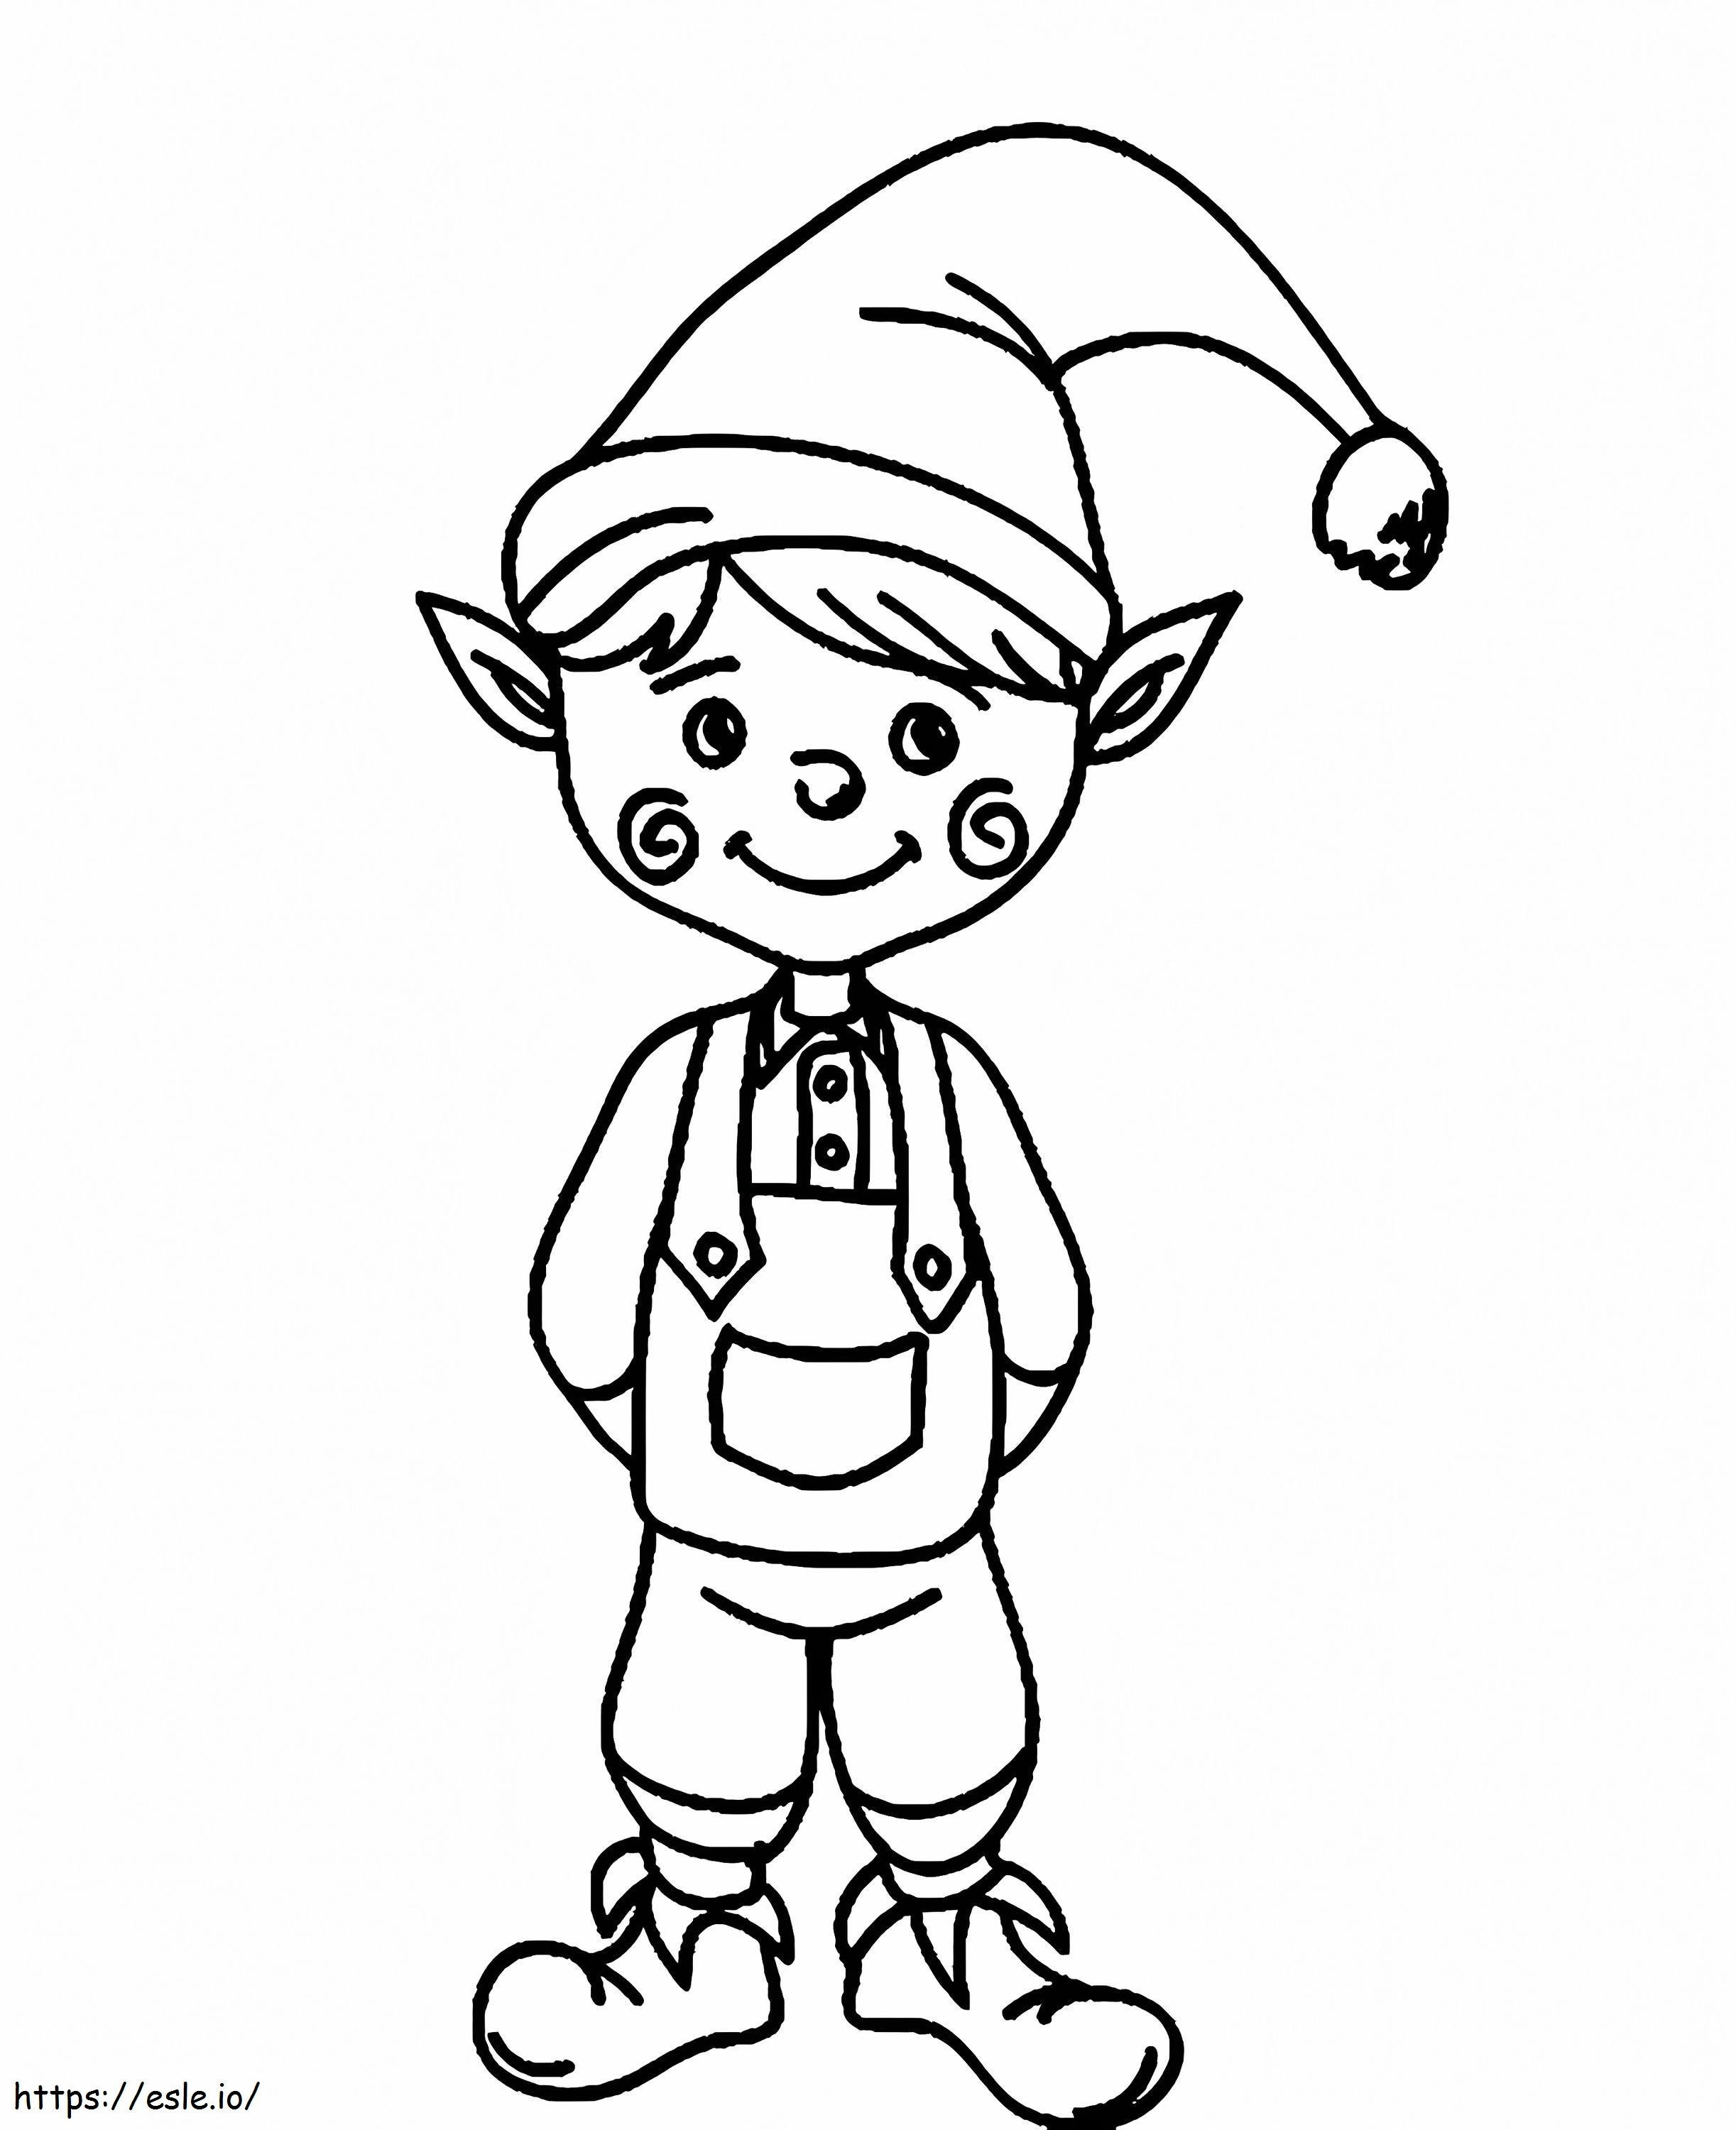 1544403547 Elf Clipart Outline 595098 9087050 coloring page